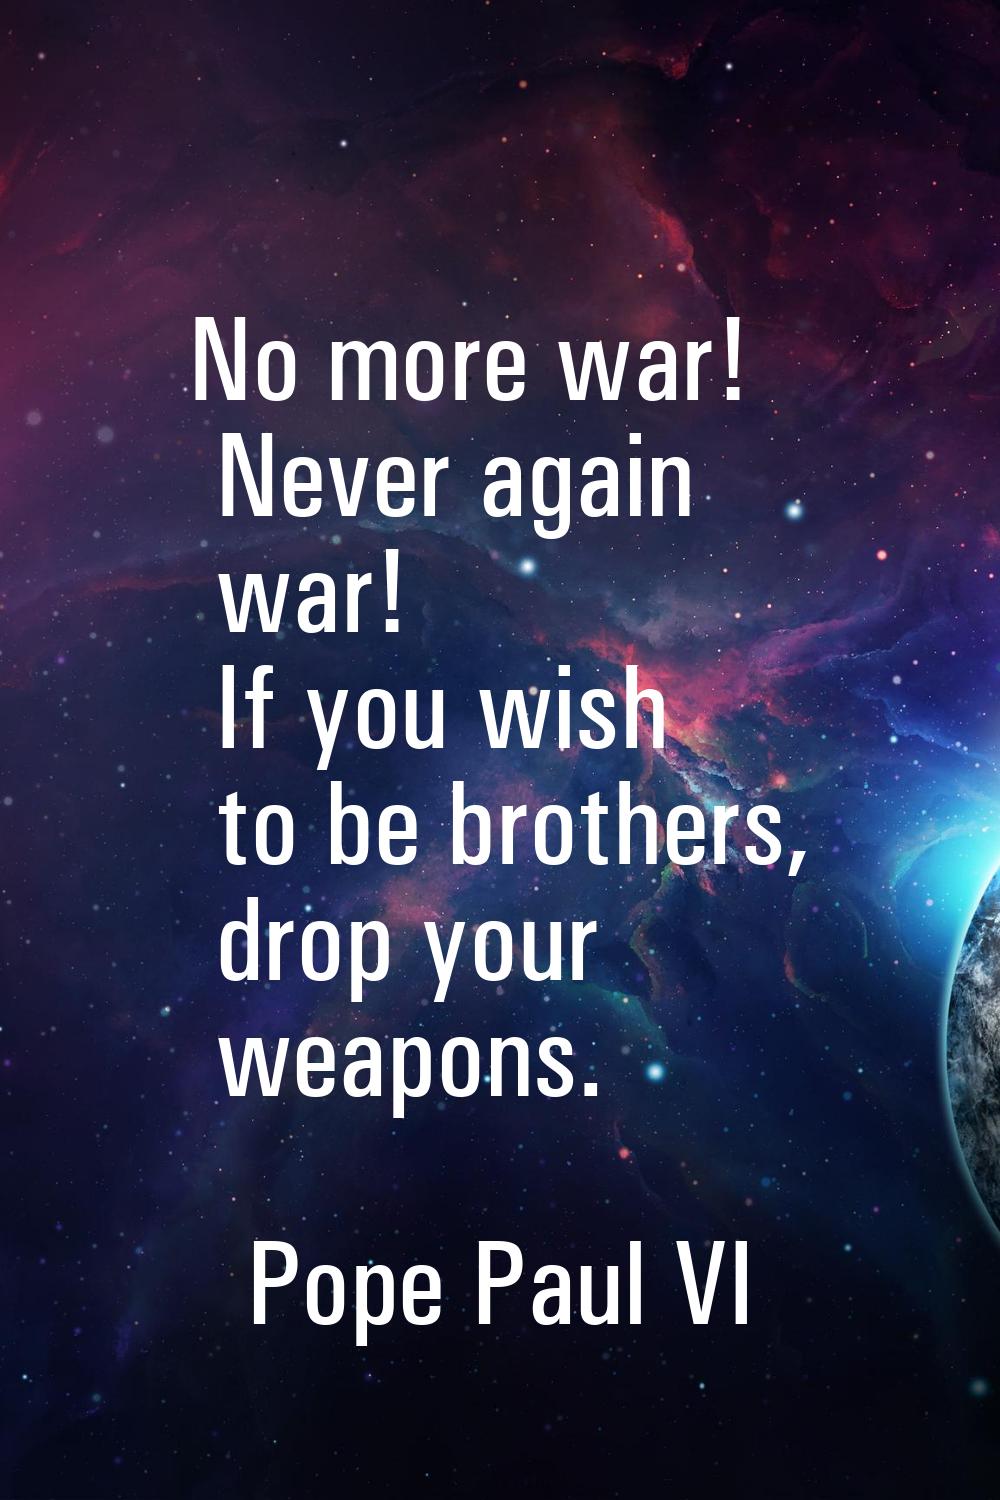 No more war! Never again war! If you wish to be brothers, drop your weapons.